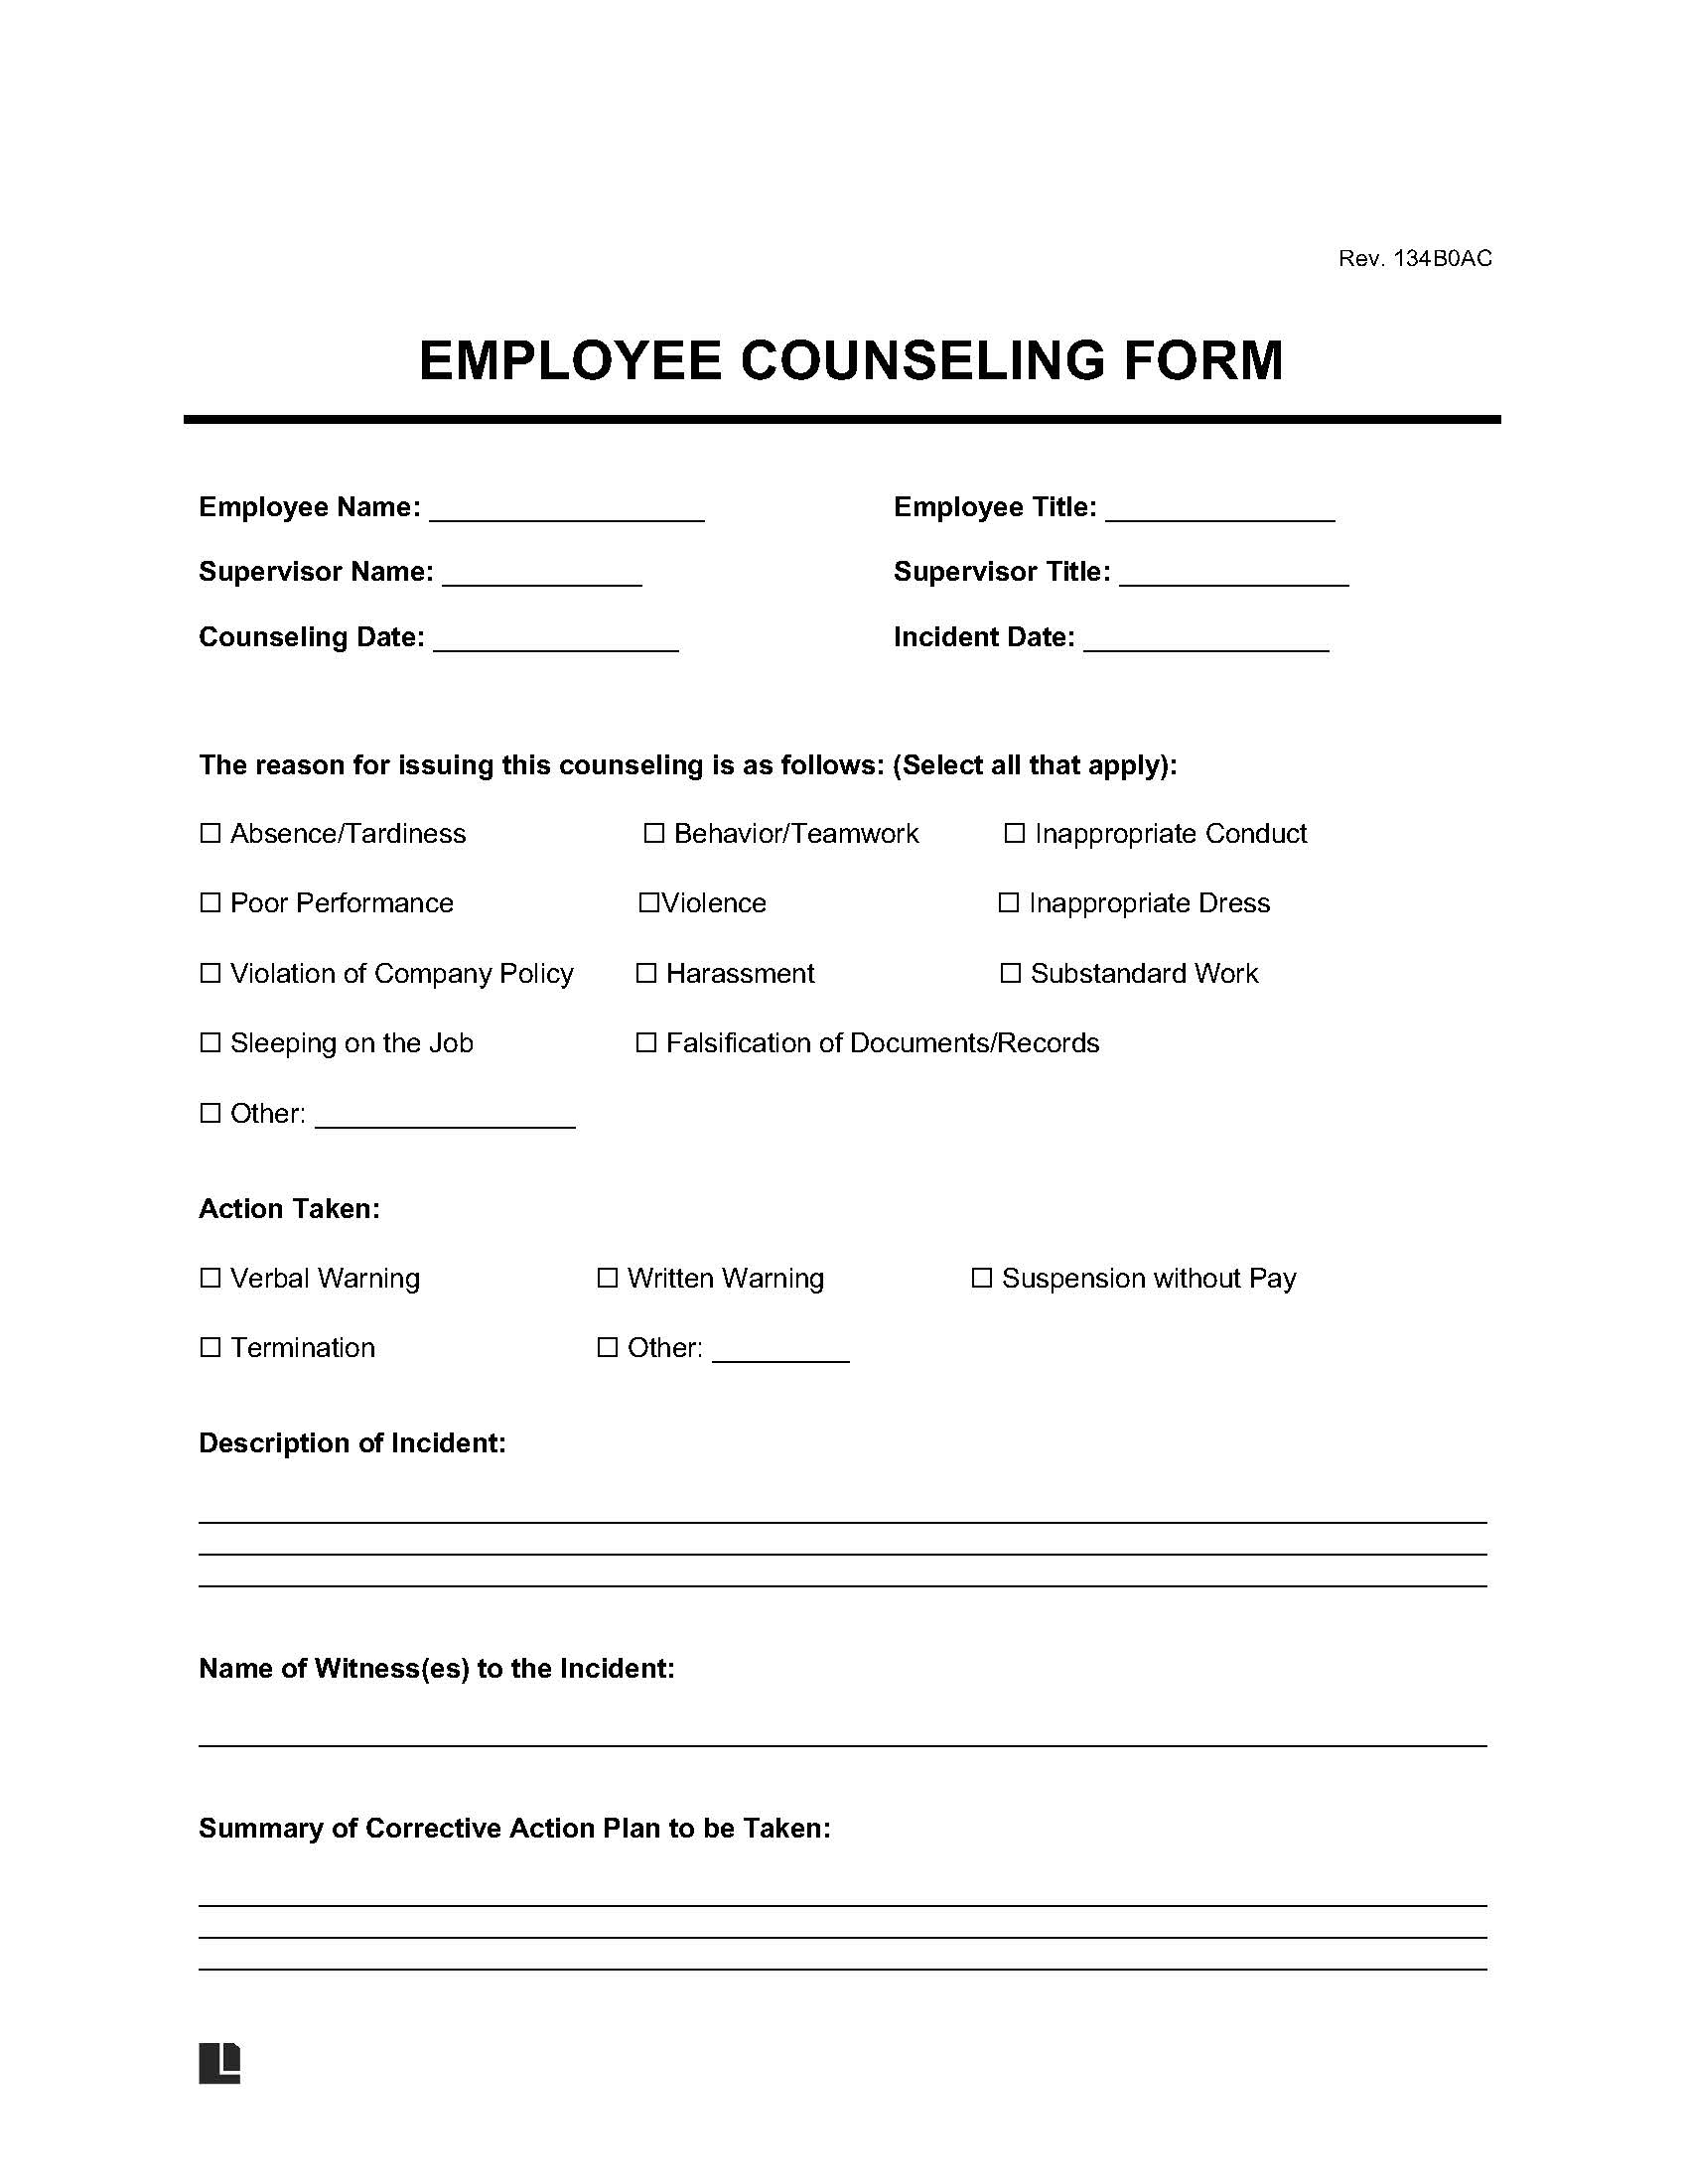 Employee Counseling Form Sample